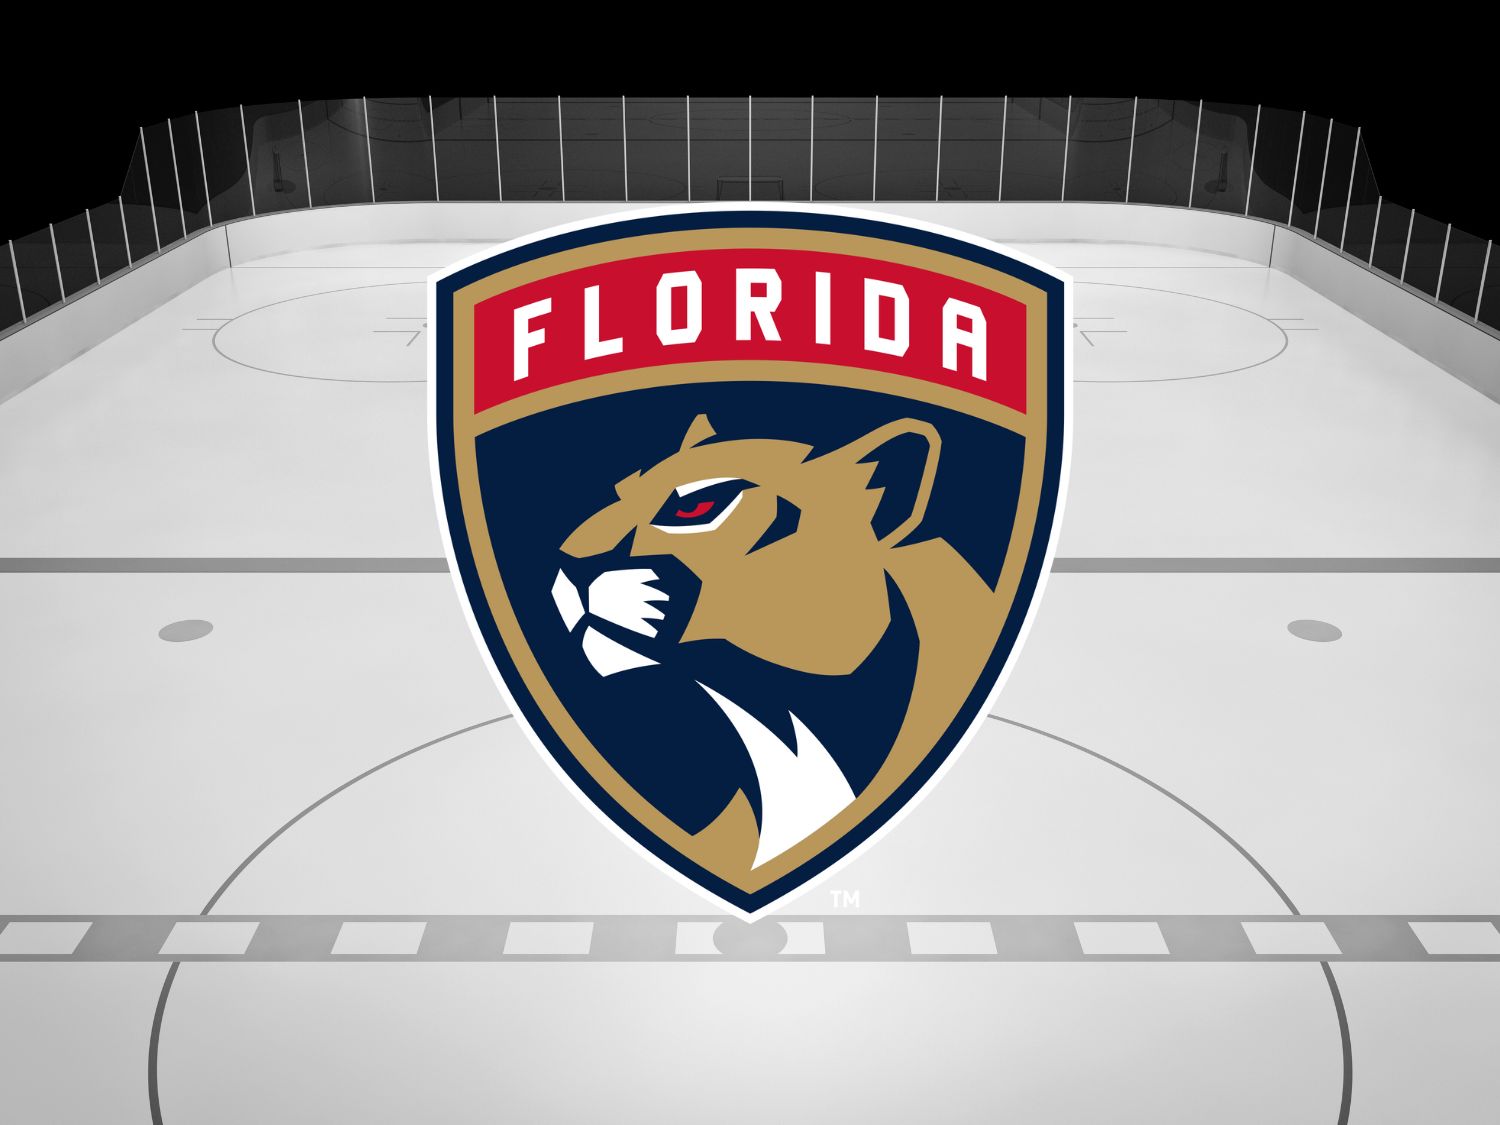 Florida Panthers Tickets and Seats